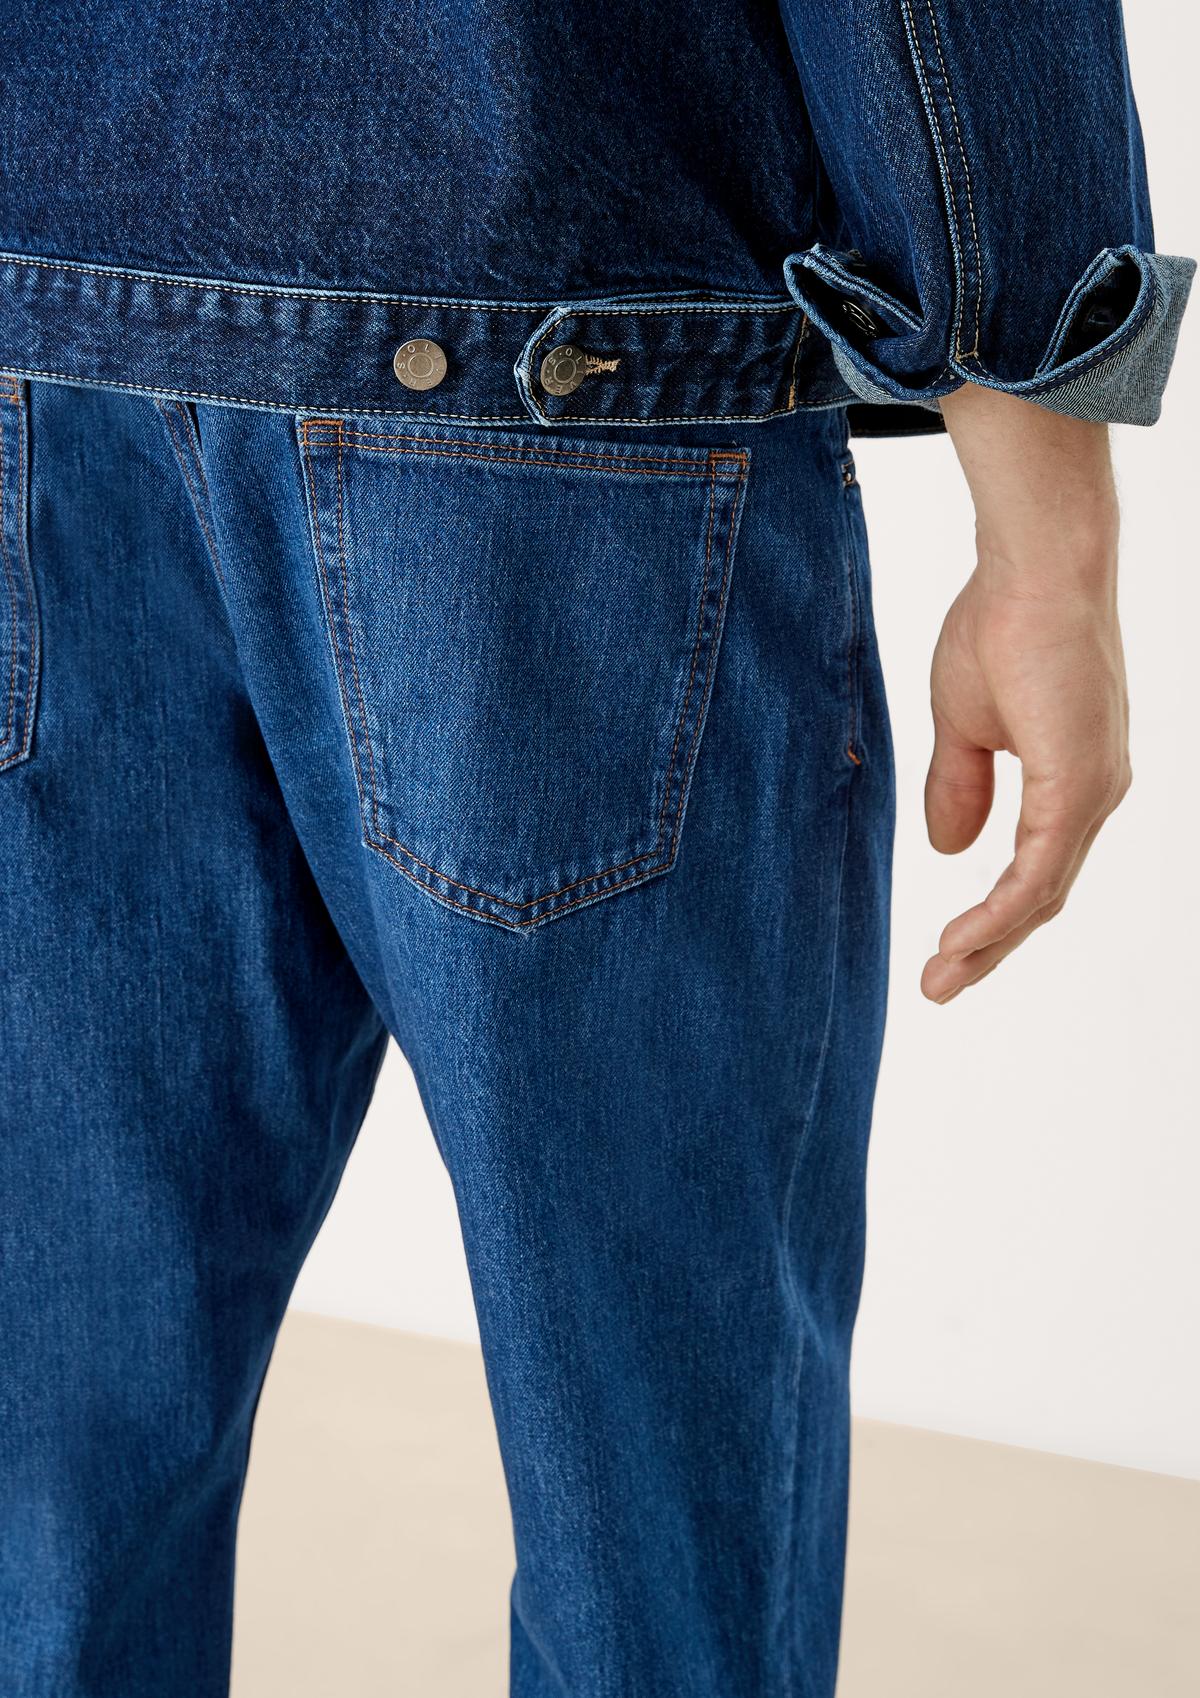 s.Oliver Jeans Grant / Relaxed Fit / Mid Rise / Tapered Leg